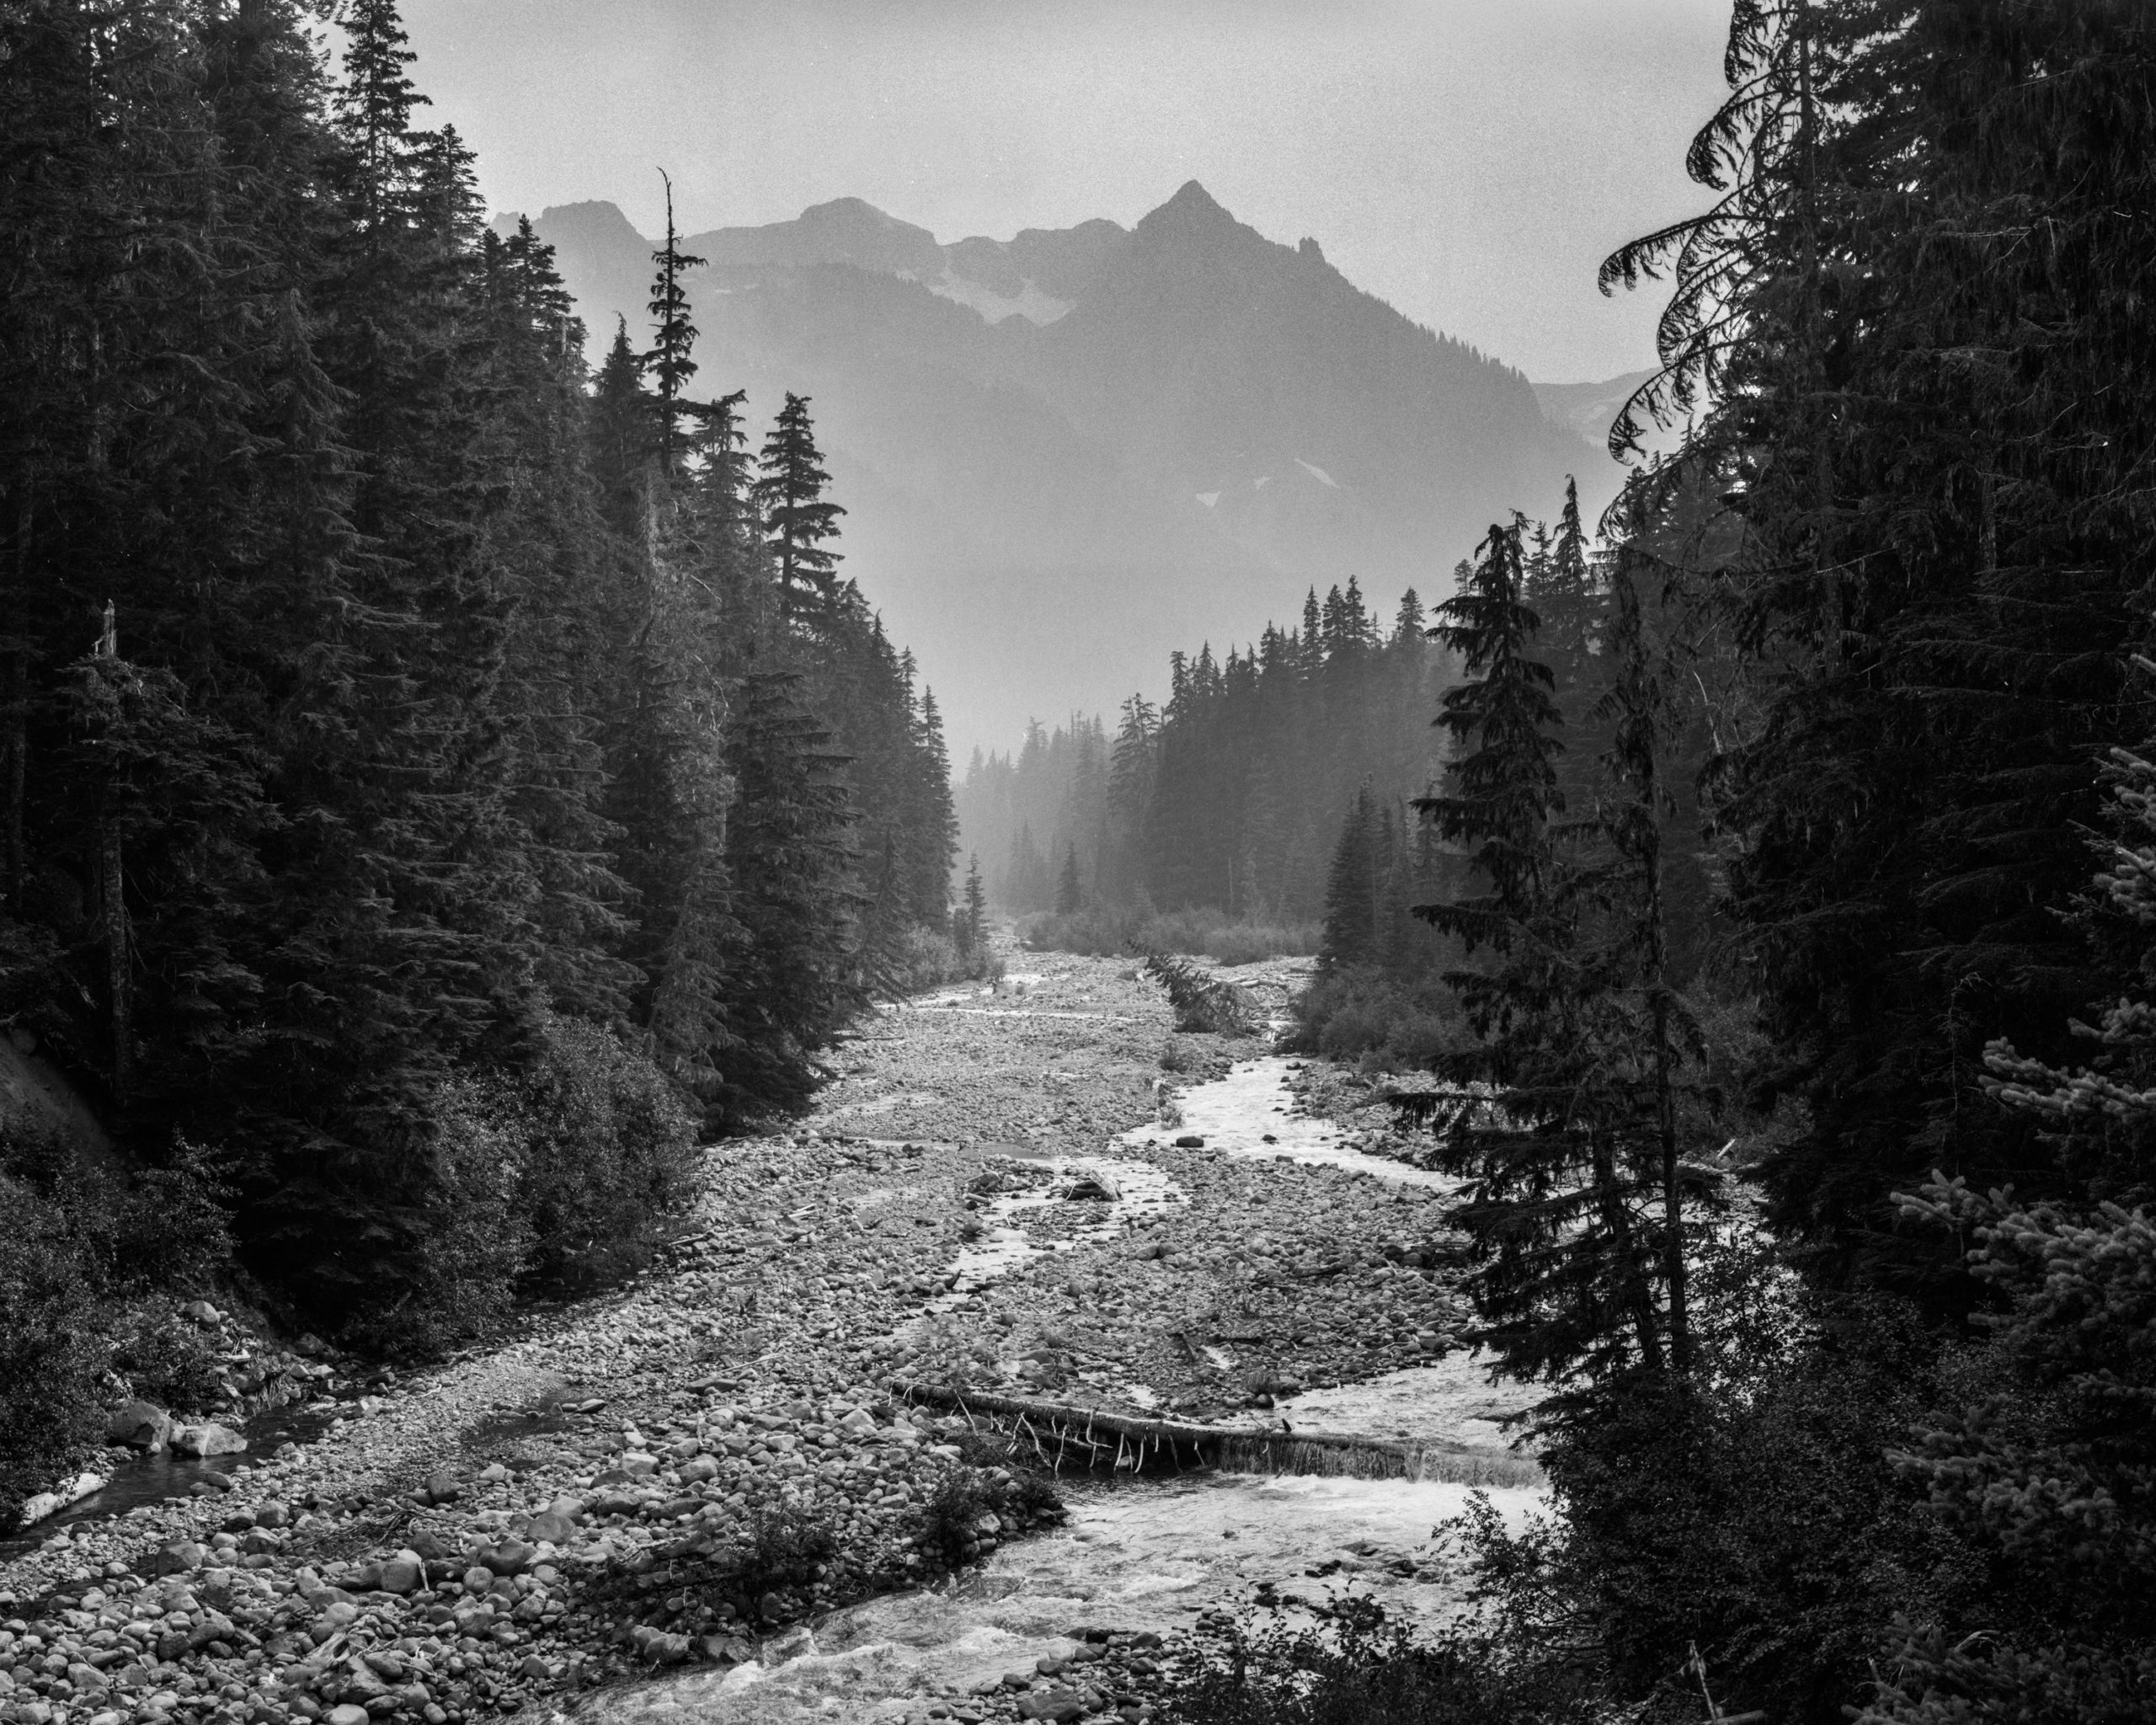 A landscape of the White River in Mount Rainier National Park in Washington